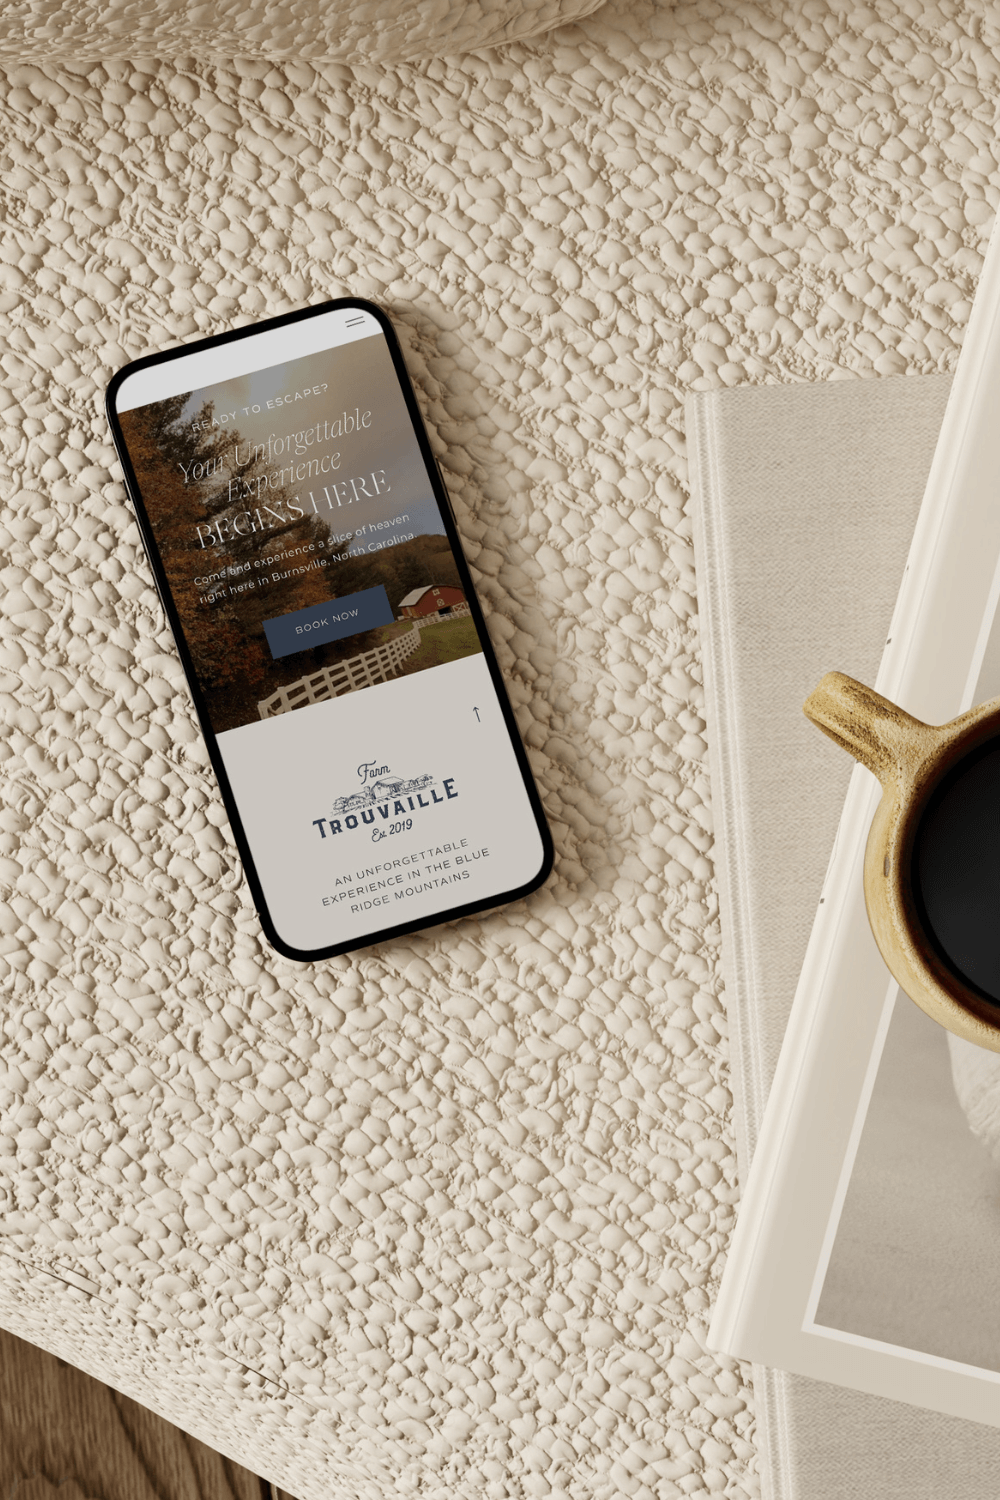 Giving you a peek into a recent project - a ShowIt website design for an Airbnb in the Blue Ridge Mountains of North Carolina. Yes, a stronger more curated online presence is the perfect way to not just book out your calendar, but to serve your guests in planning their perfect getaway. Click to dive in and see more of this unique mountain getaway!